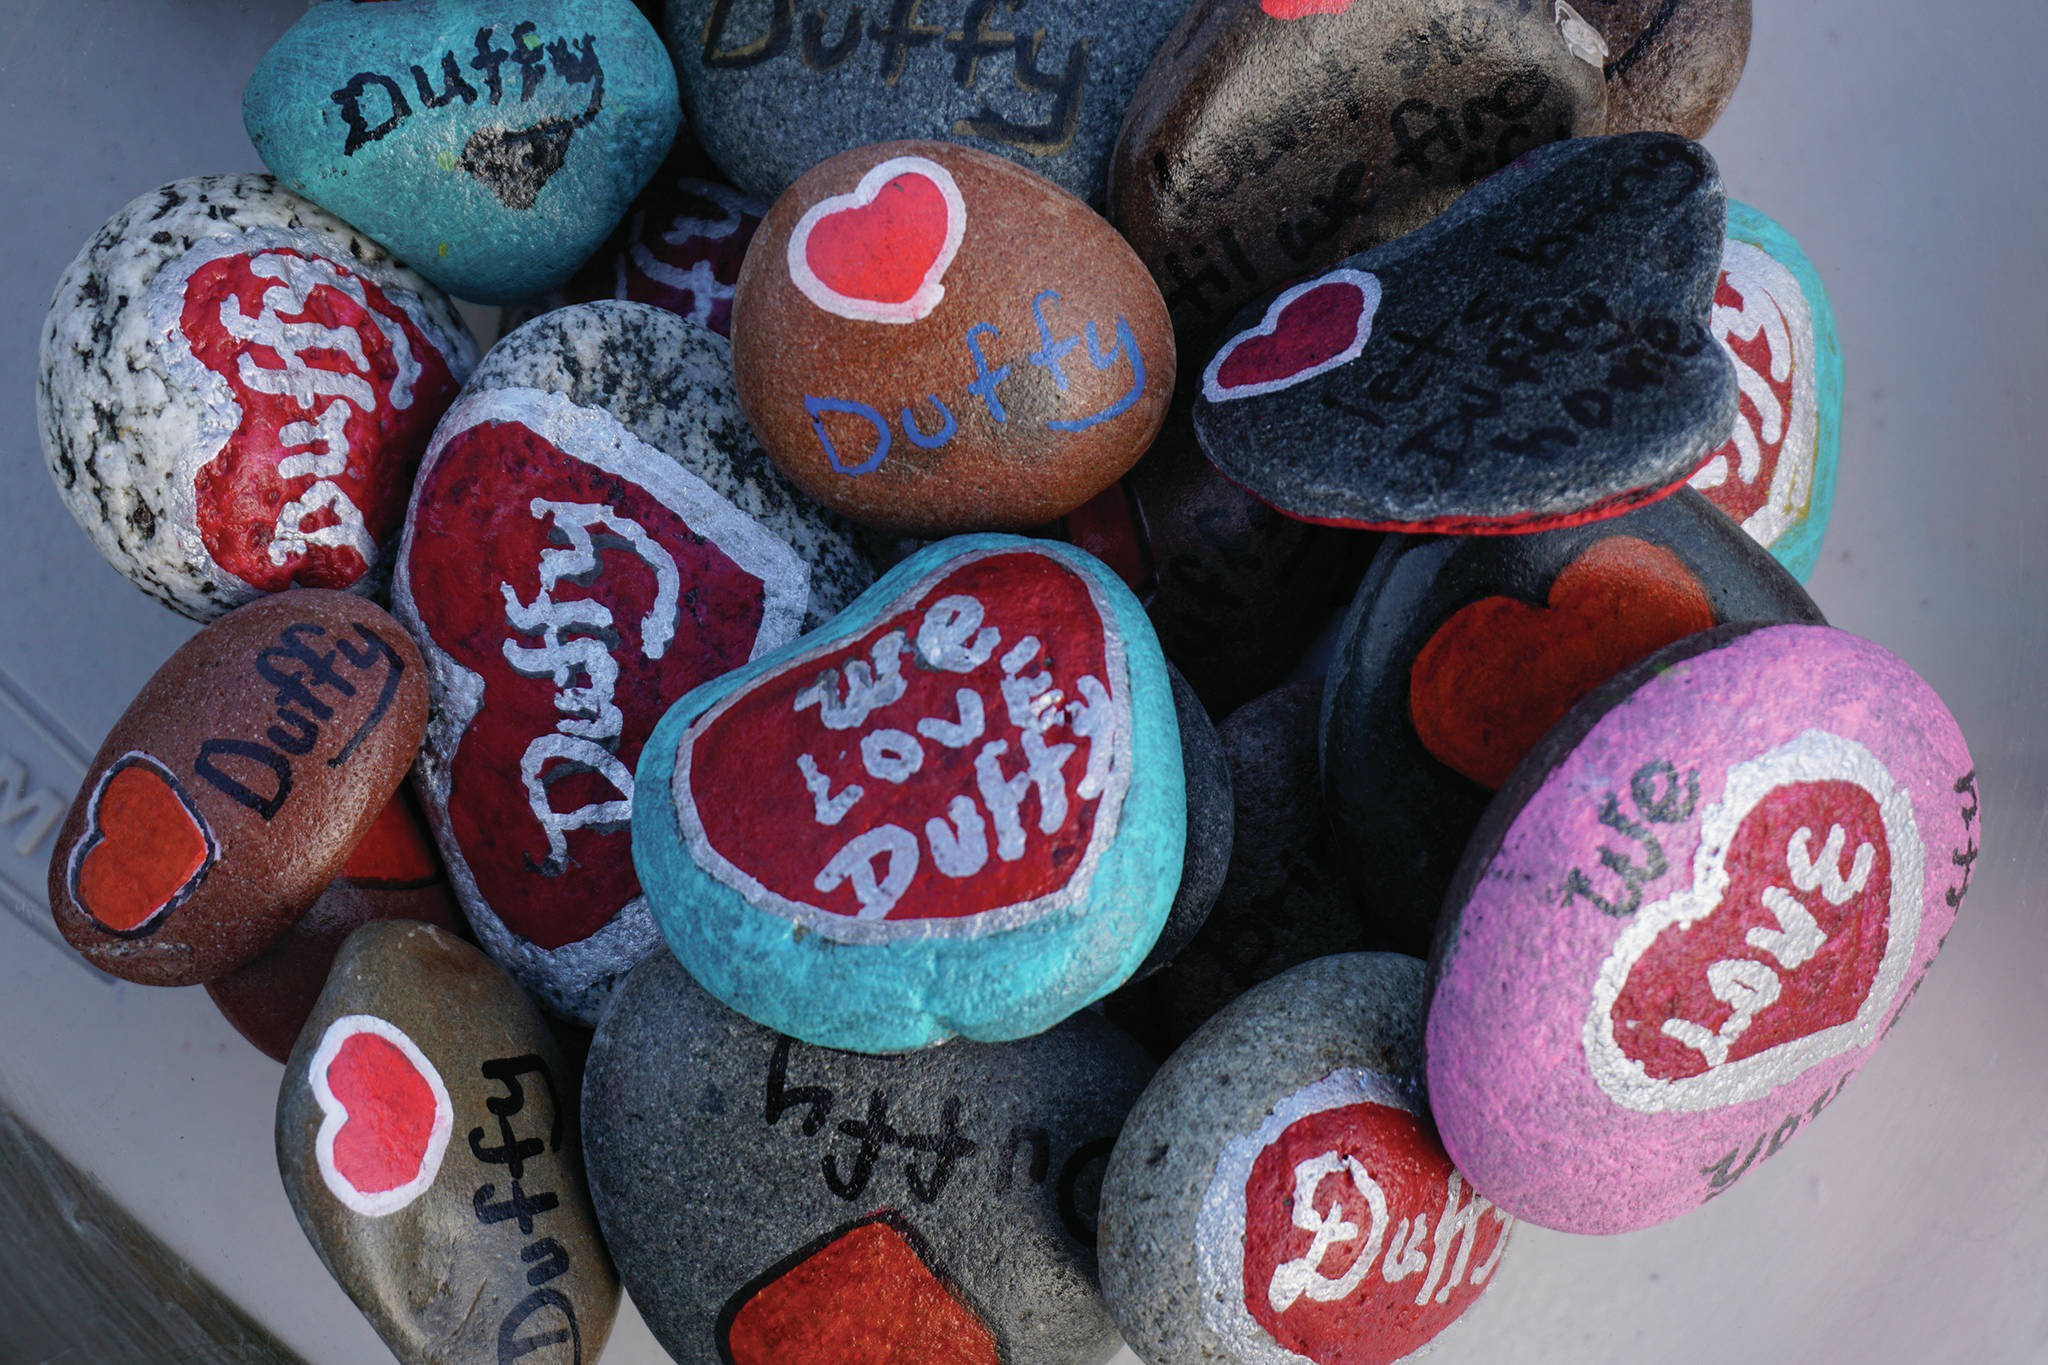 A bowl of painted rocks were given out Saturday, Nov. 23, 2019, at a vigil for Anesha “Duffy” Murnane, a Homer woman missing since Oct. 17, at WKFL Park in Homer, Alaska. (Photo by Michael Armstrong/Homer News)